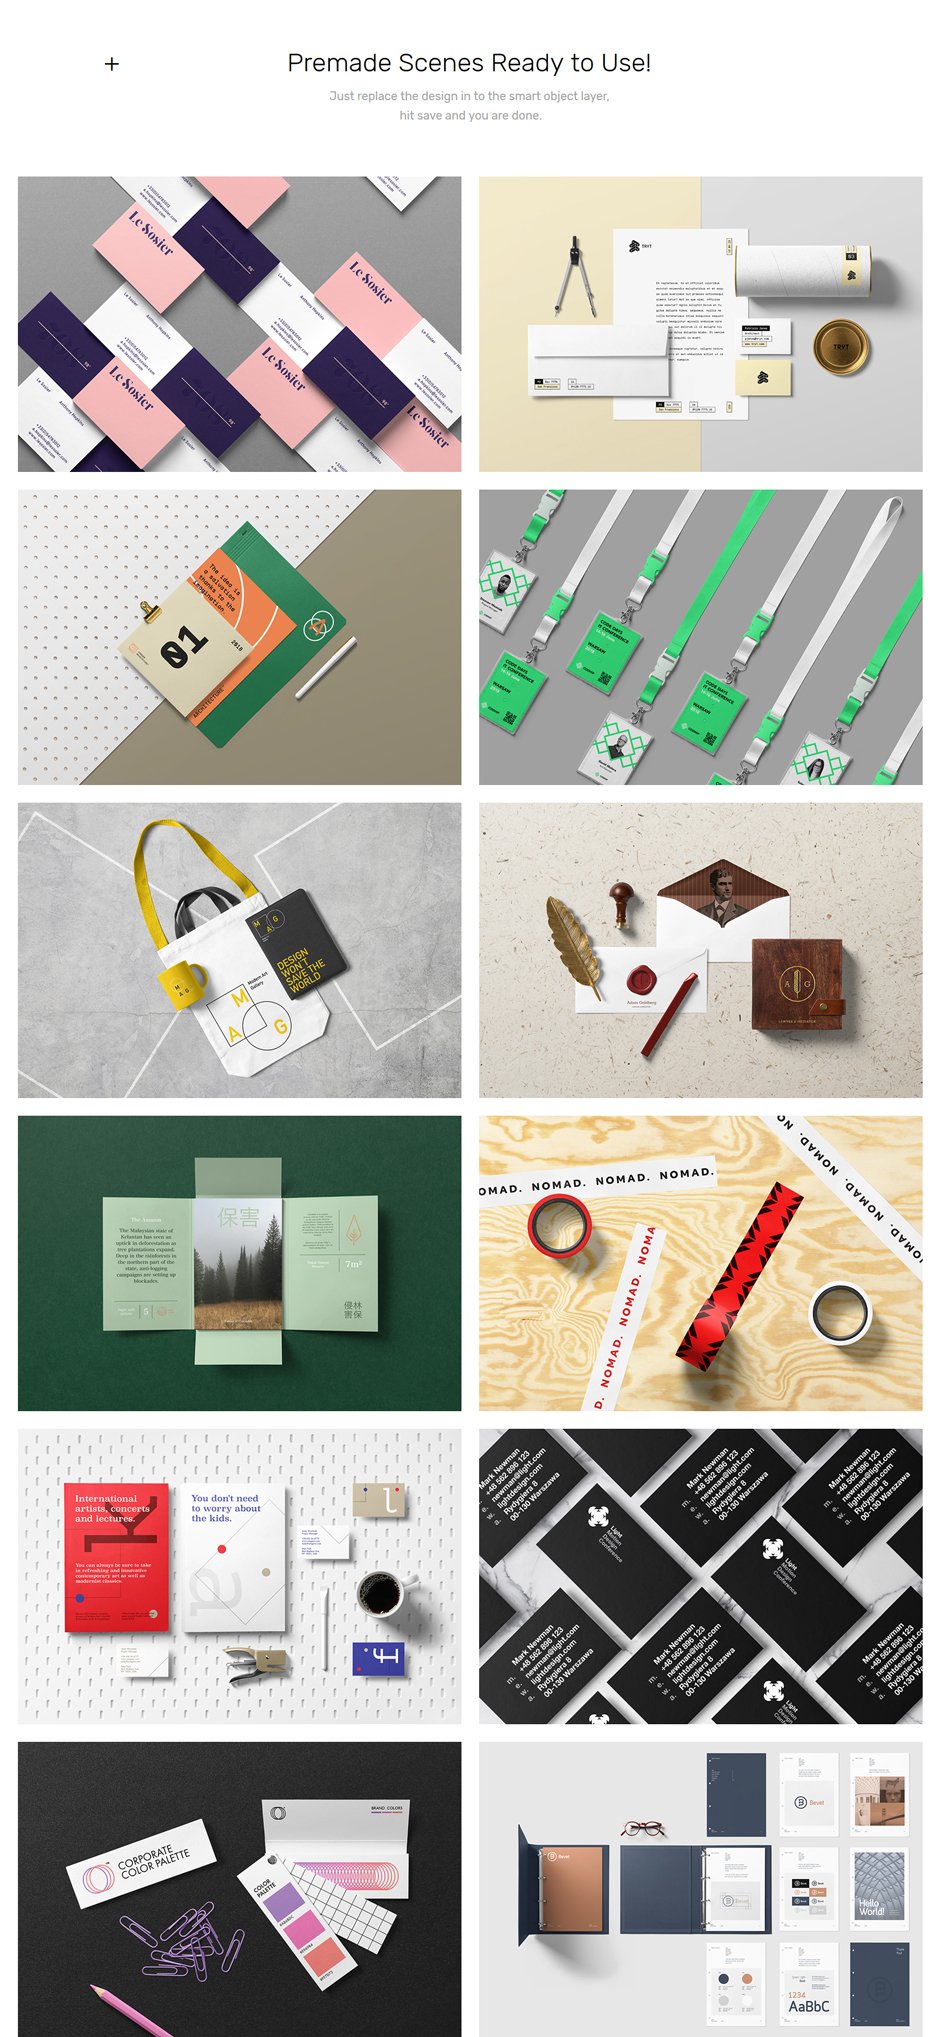 Corporate Stationary Mockup Pack